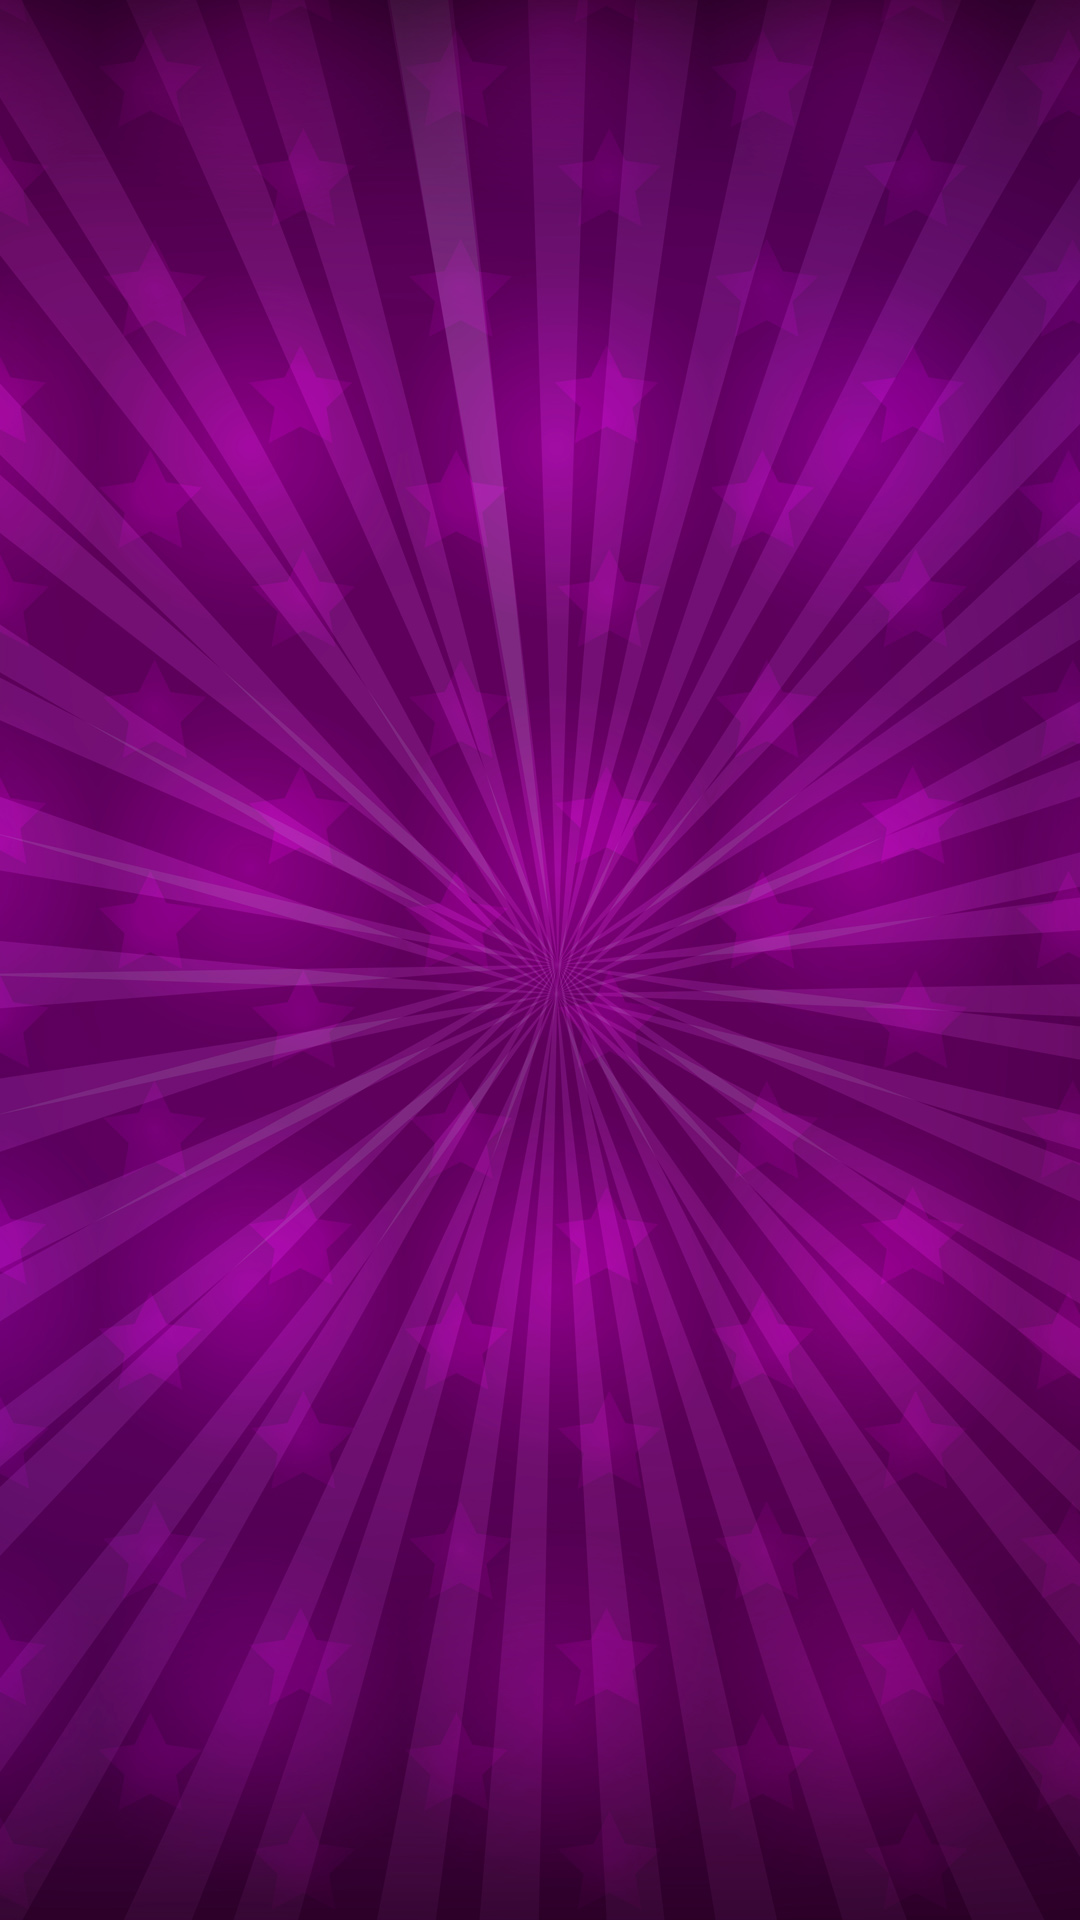 Purple Iphone 6s Plus Wallpaper Gallery Yopriceville High Quality Images And Transparent Png Free Clipart